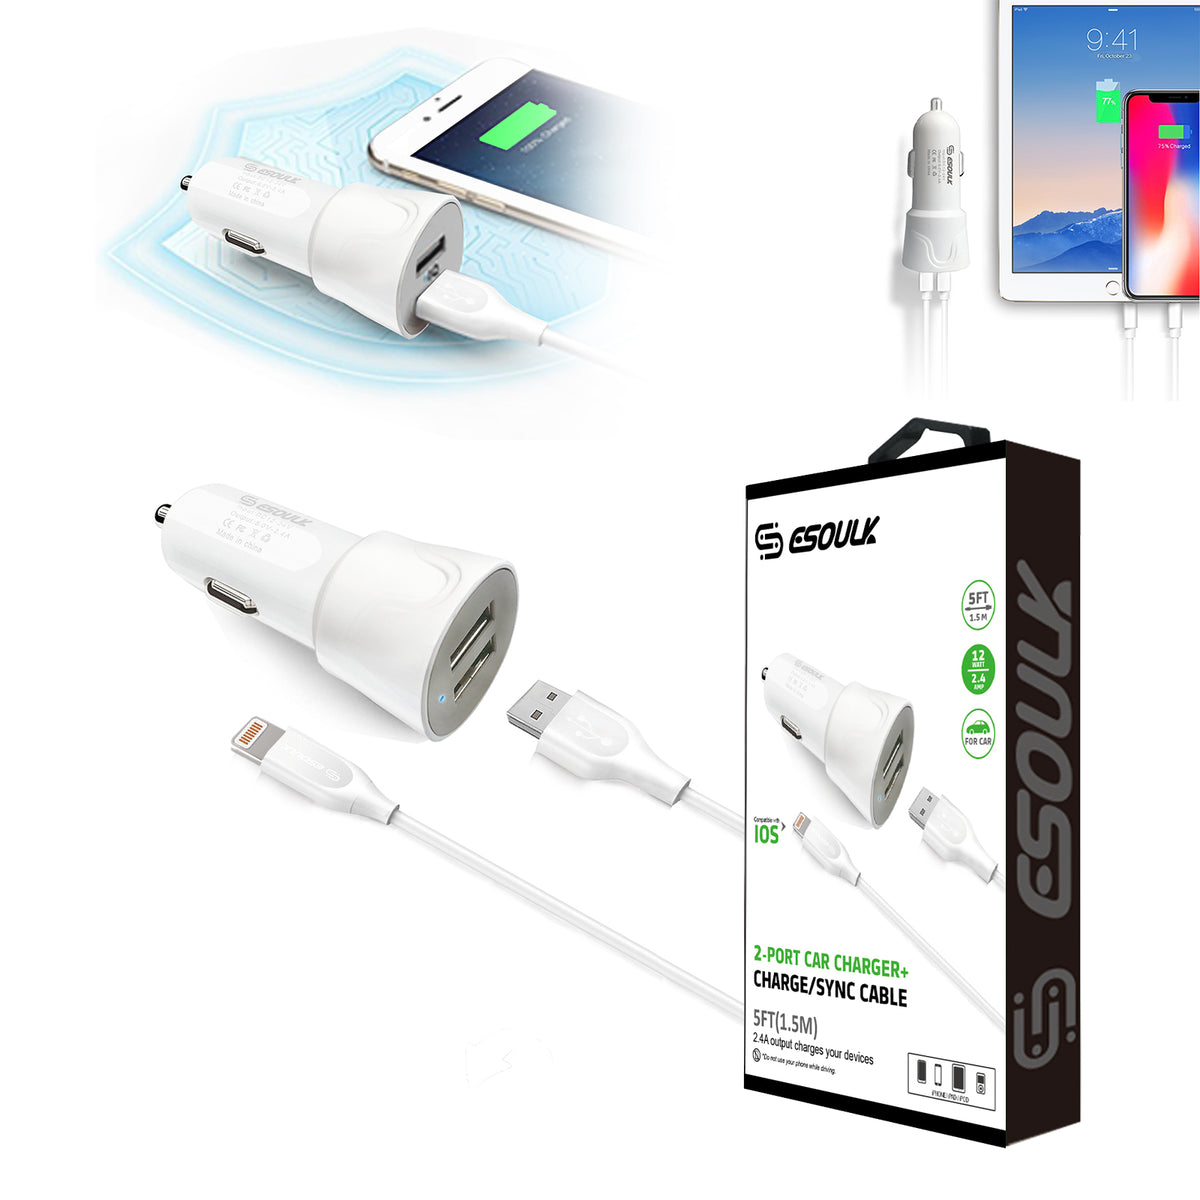 Esoulk Iphone 2-Port Car Charger with 5feet Cable - White